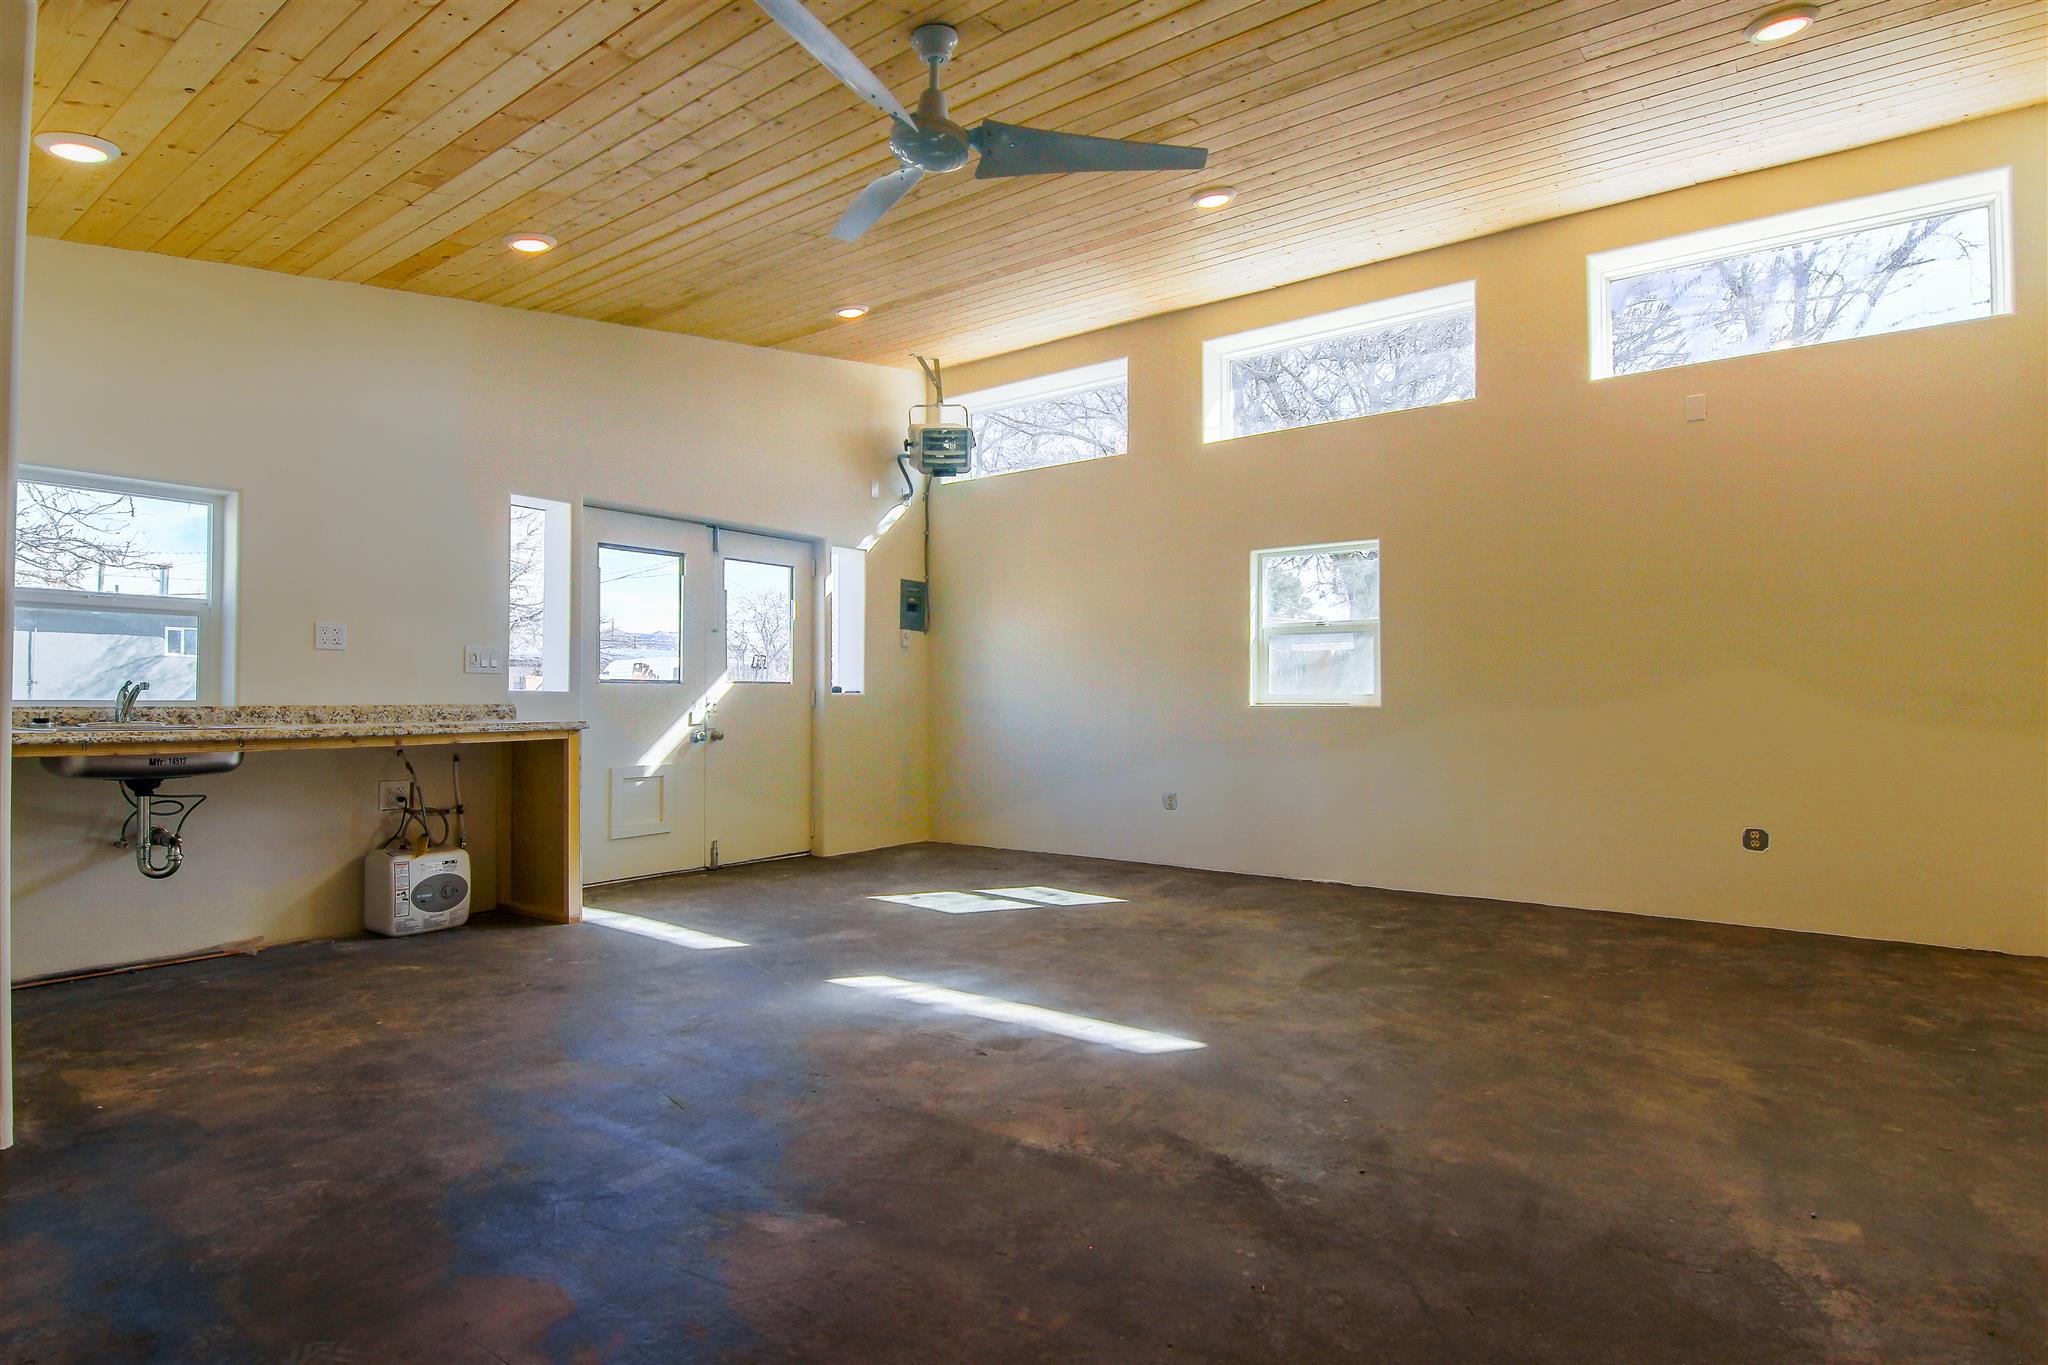 1526 Fifth, Santa Fe, New Mexico 87505, 3 Bedrooms Bedrooms, ,2 BathroomsBathrooms,Residential,For Sale,1526 Fifth,201905137